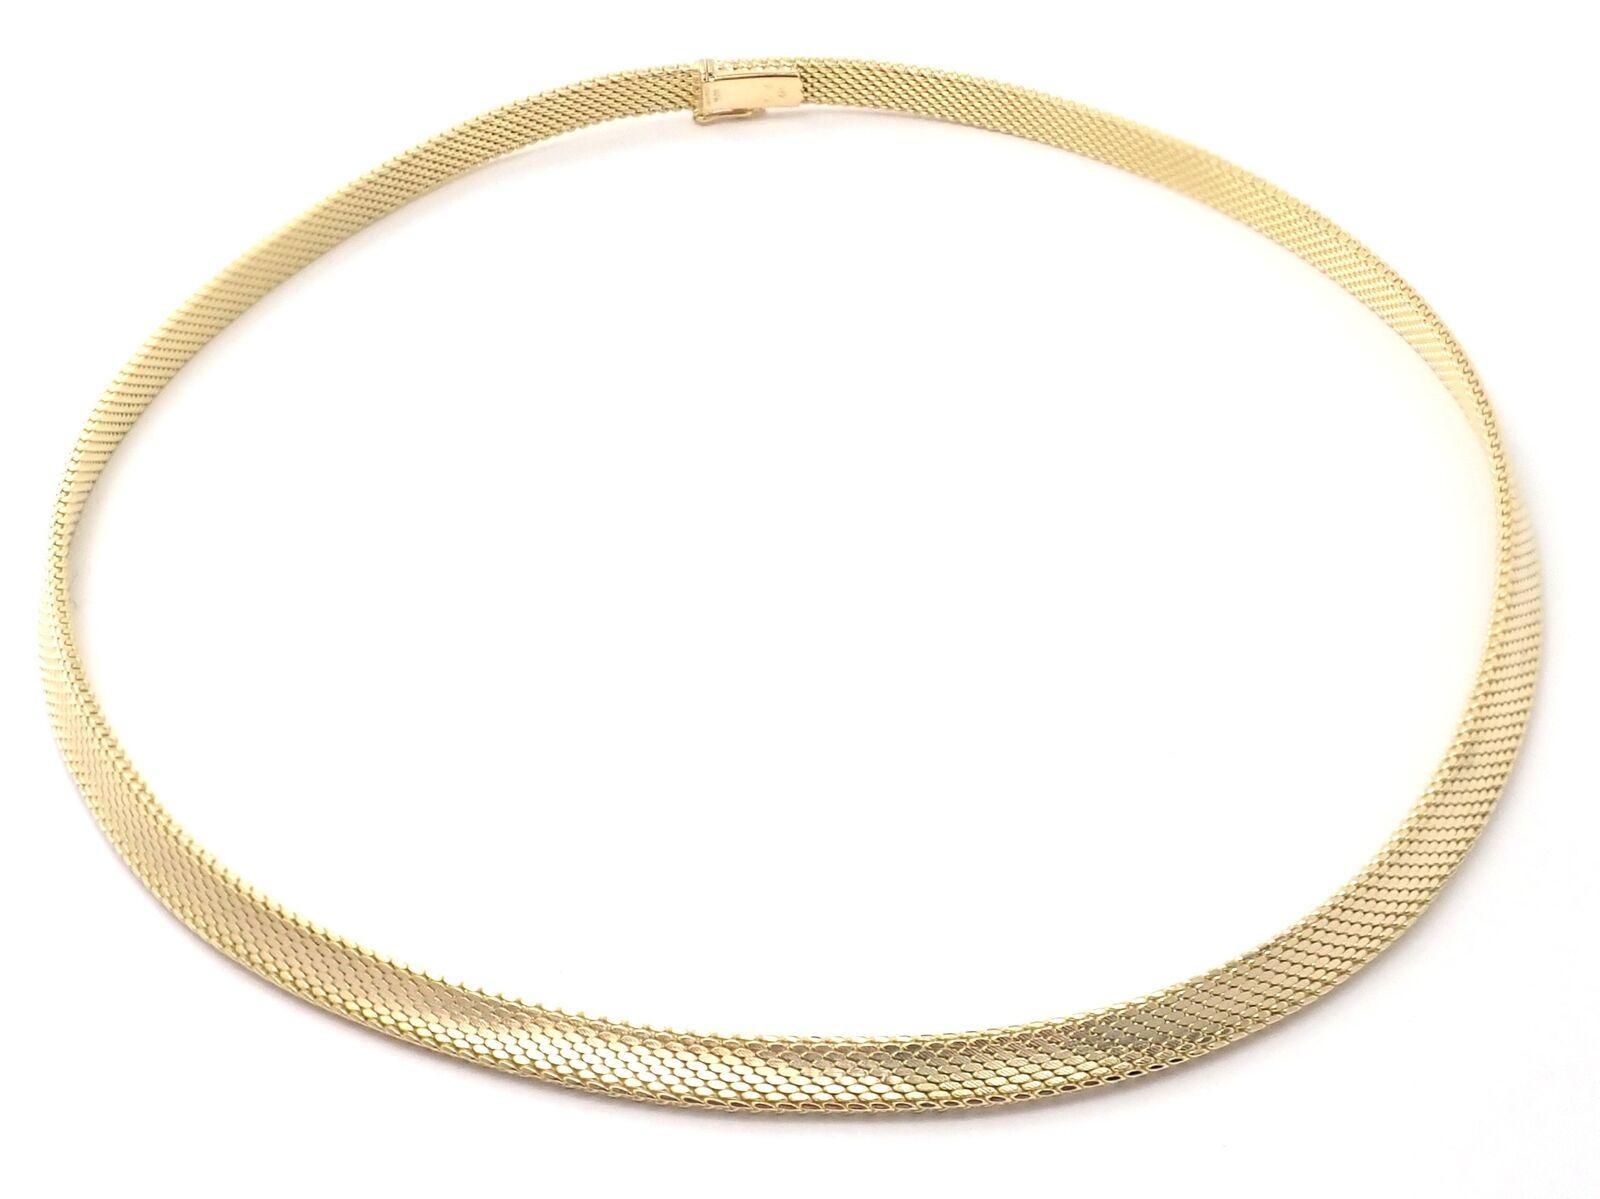 18k Yellow Gold Somerset Mesh Necklace by Tiffany & Co.
Details: 
Length: 17.5